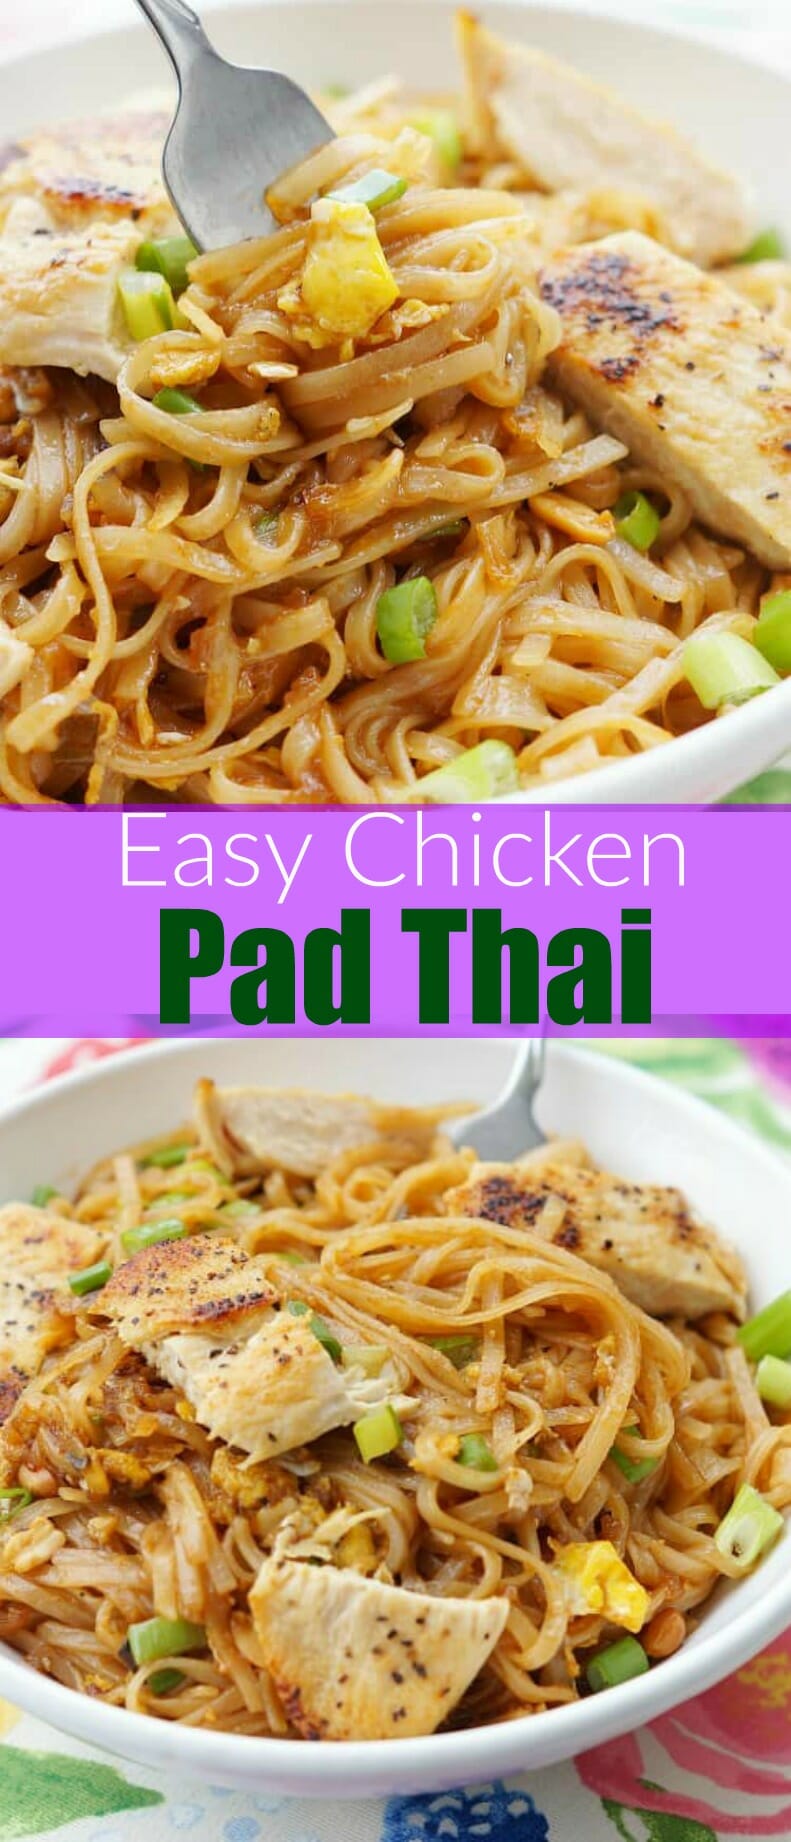 Easy Chicken Pad Thai. This healthy pad thai with chicken is so good and so easy! Chicken dinners that take less than 15 minutes are my favorite! T